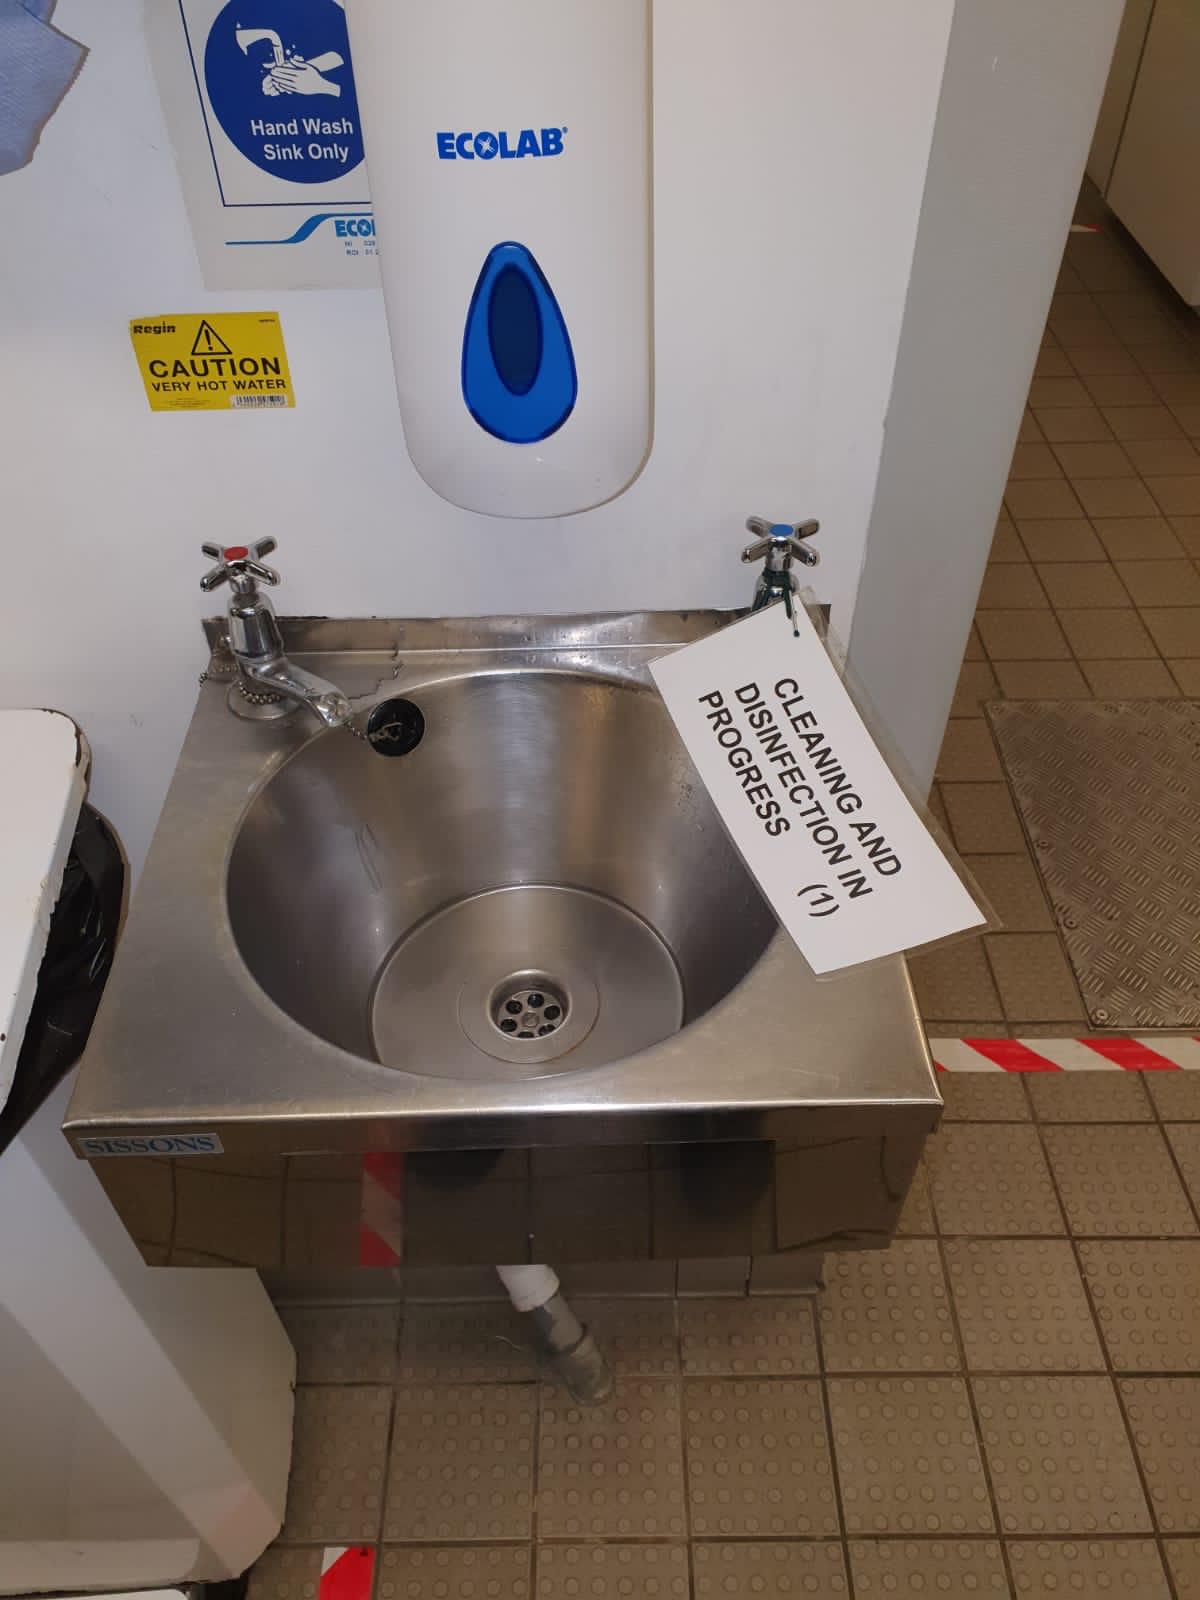 Water Hygiene carried out during the Covid-19 Pandemic